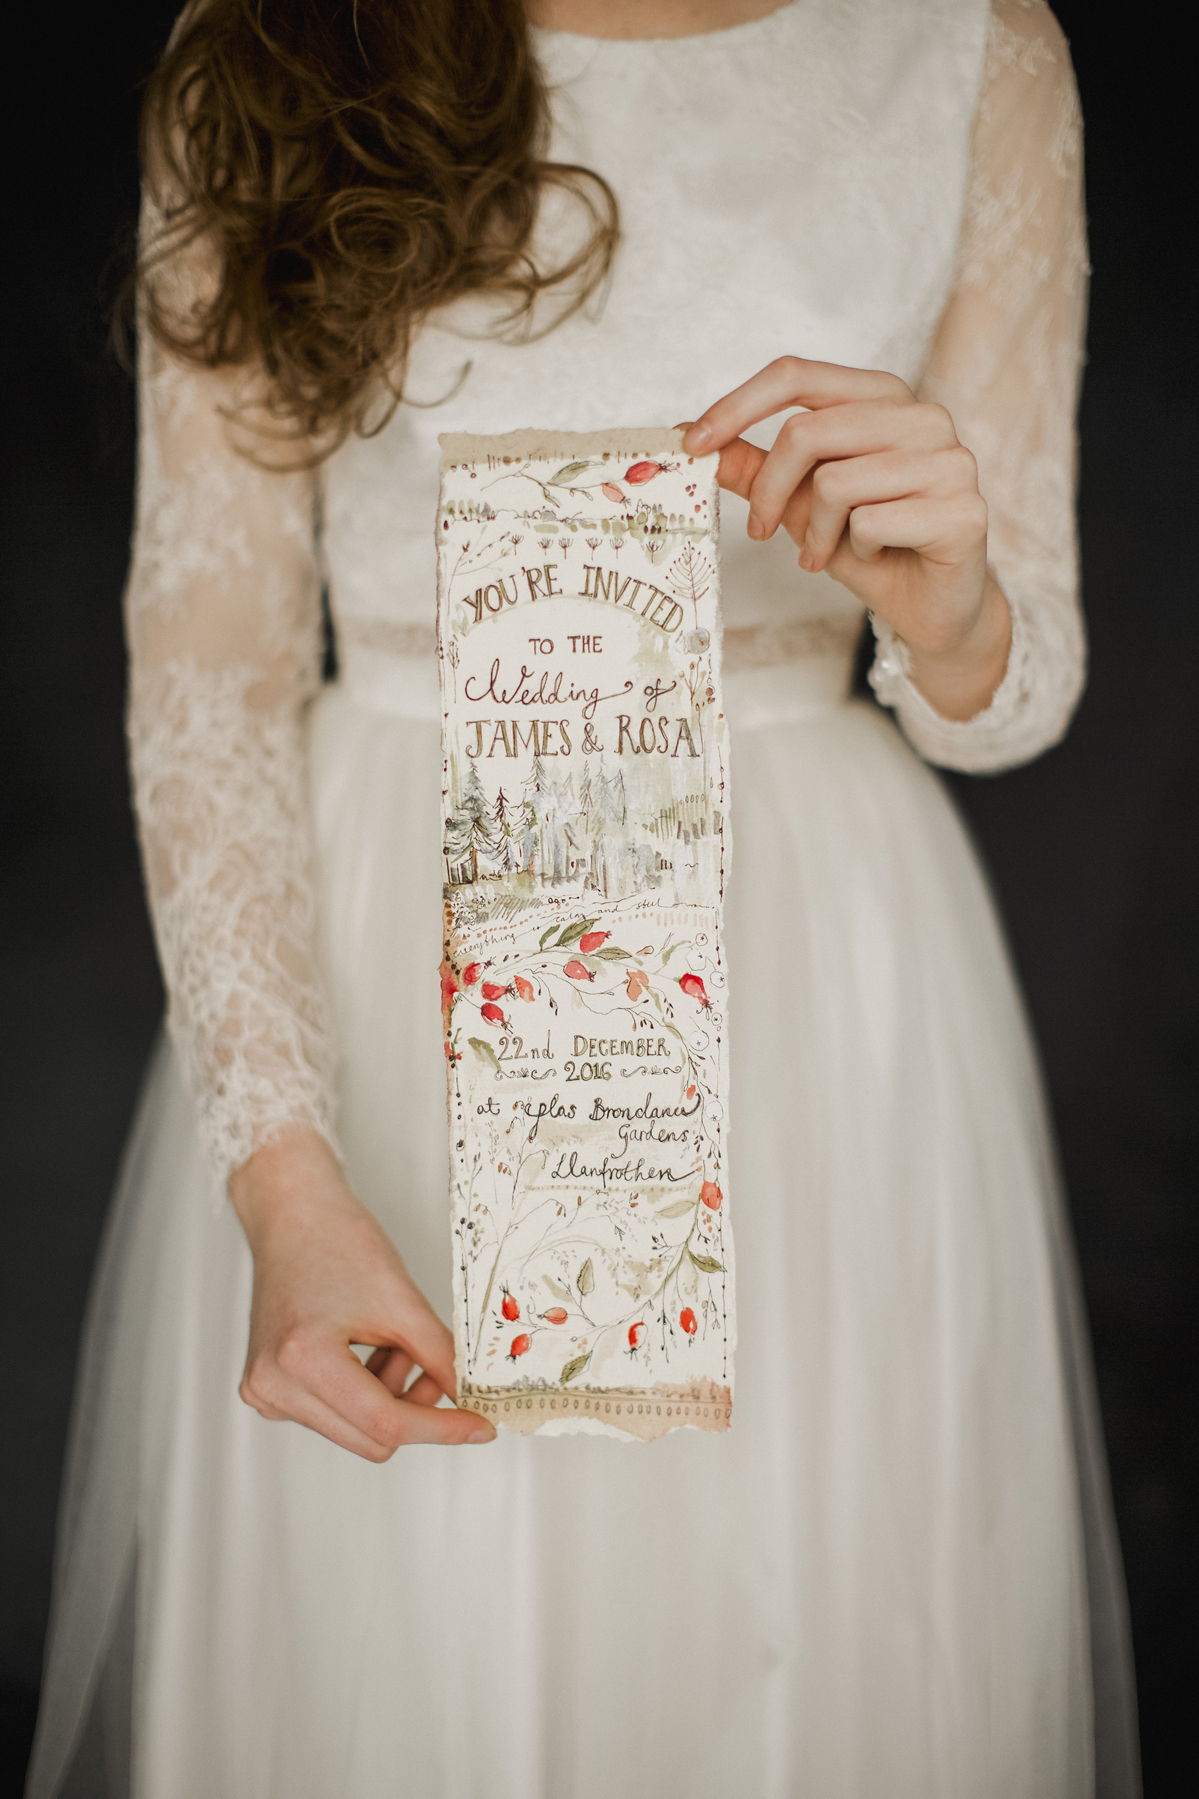 Wild and natural winter wedding inspiration with Amy Swann. Photography by Jess Petrie.